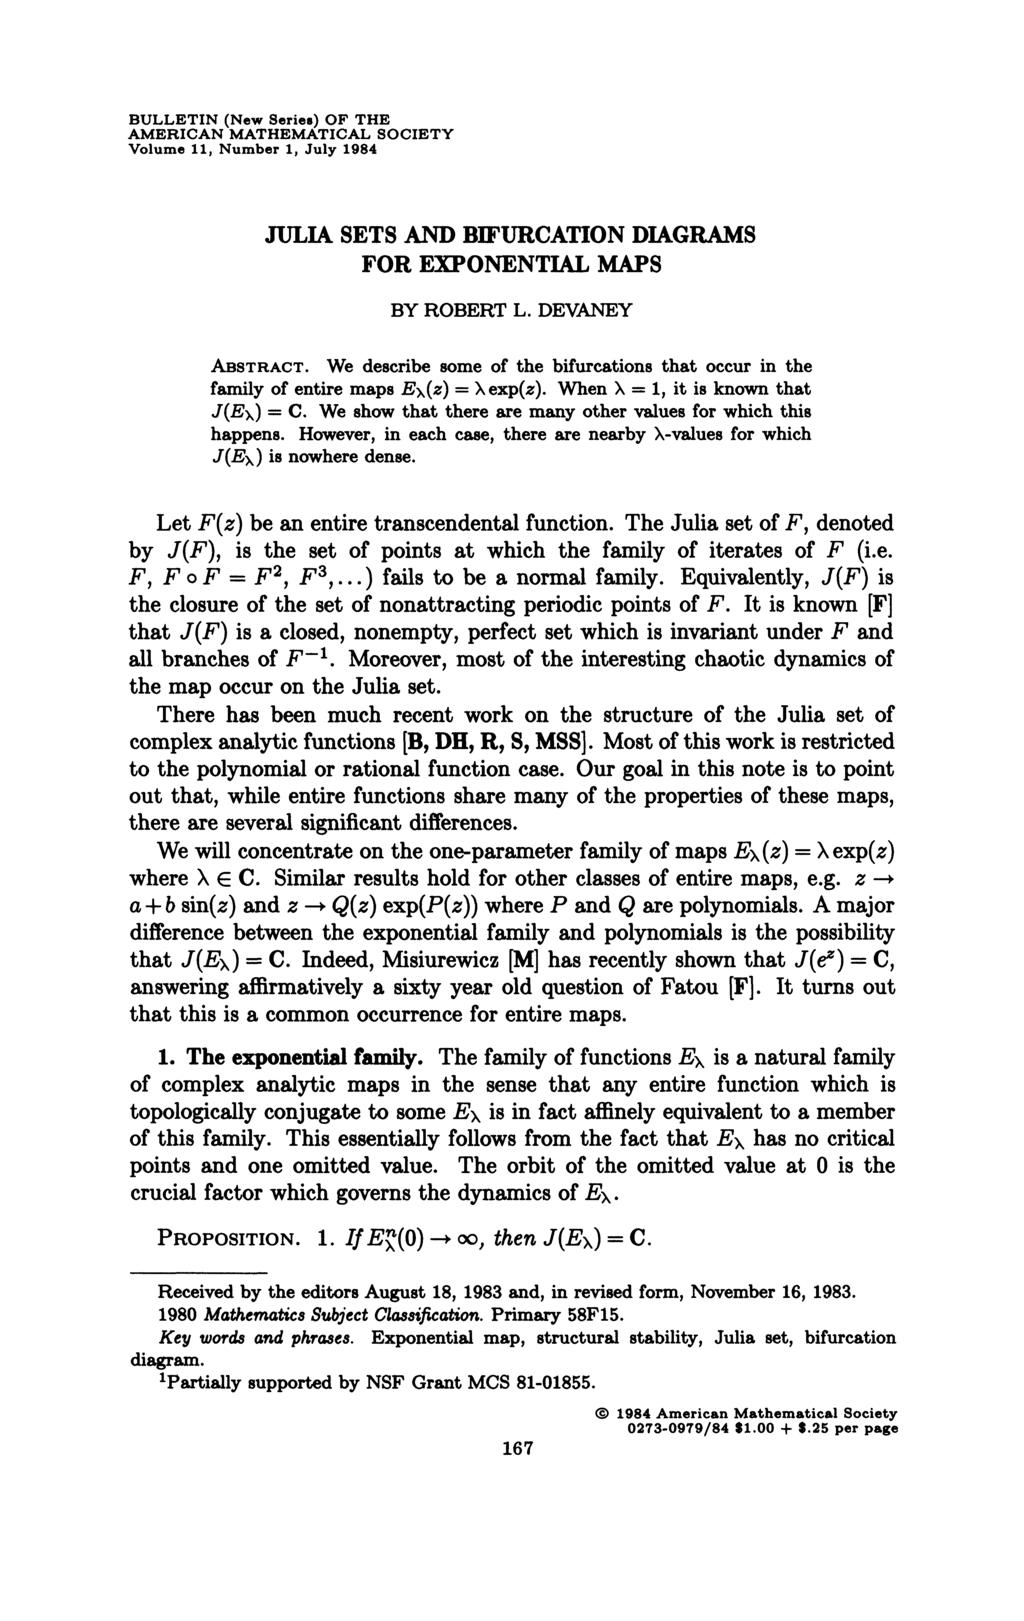 BULLETIN (New Series) OF THE AMERICAN MATHEMATICAL SOCIETY Volume 11, Number 1, July 1984 JULIA SETS AND BIFURCATION DIAGRAMS FOR EXPONENTIAL MAPS BY ROBERT L. DEVANEY ABSTRACT.